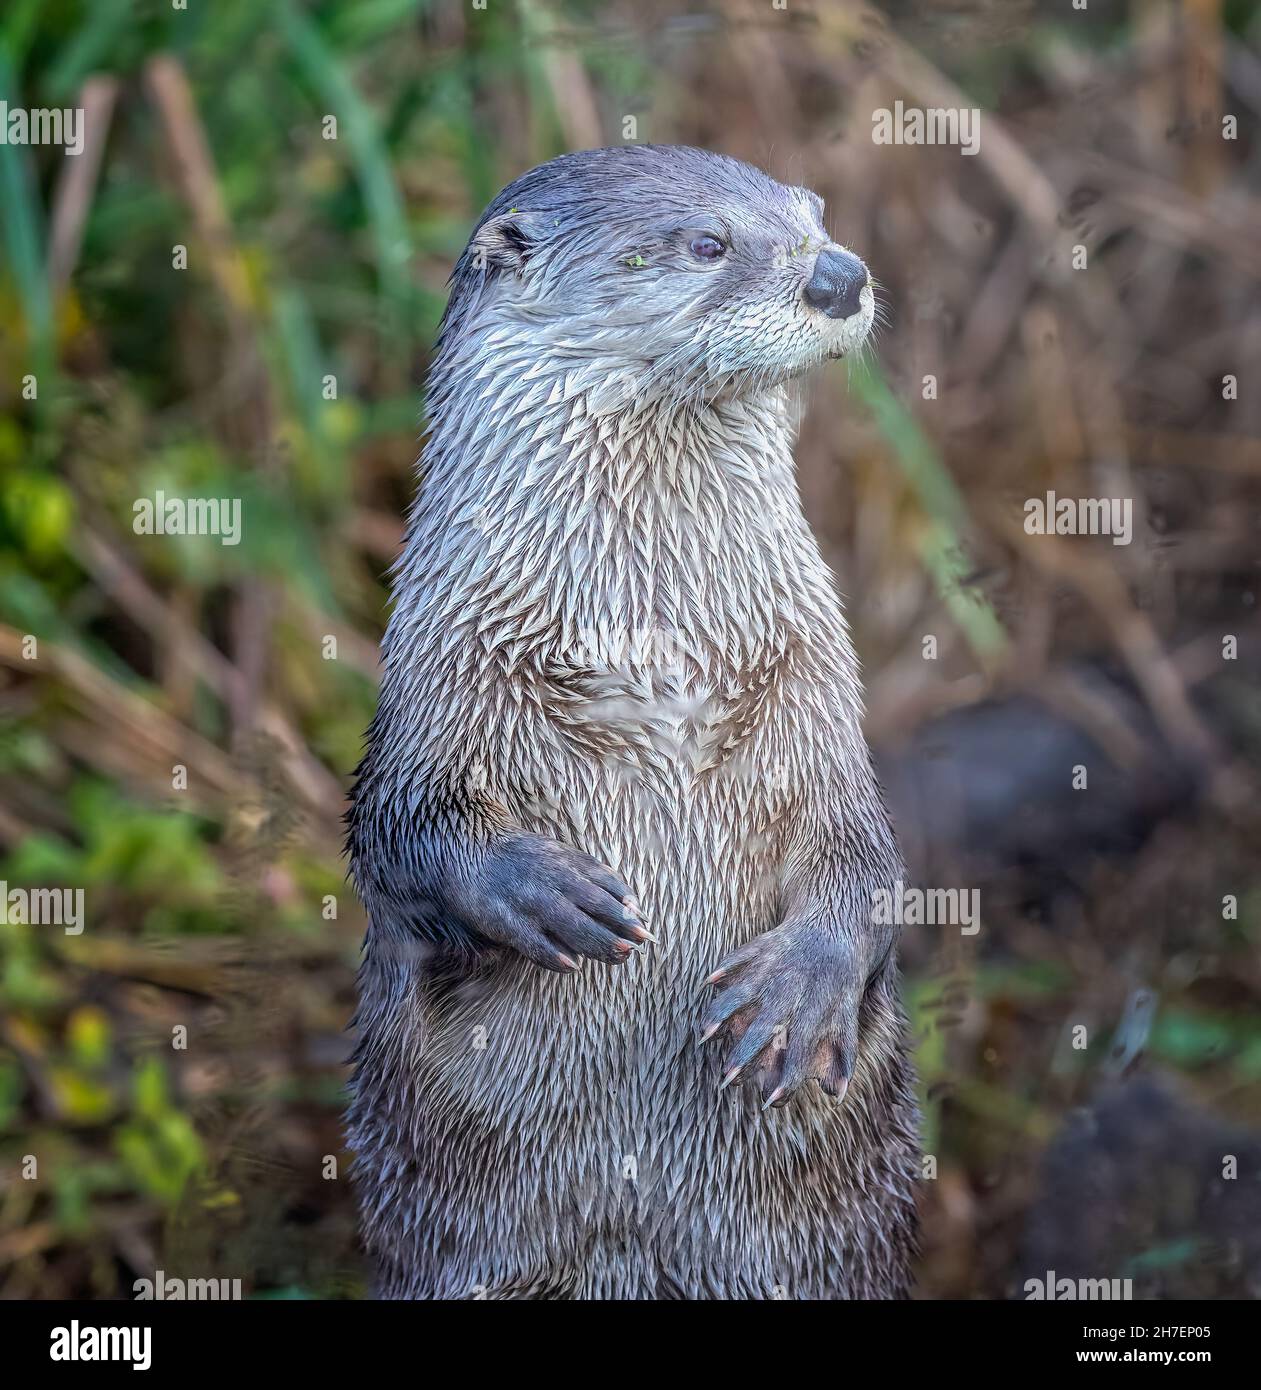 Close up of River Otter standing up looking to side Stock Photo